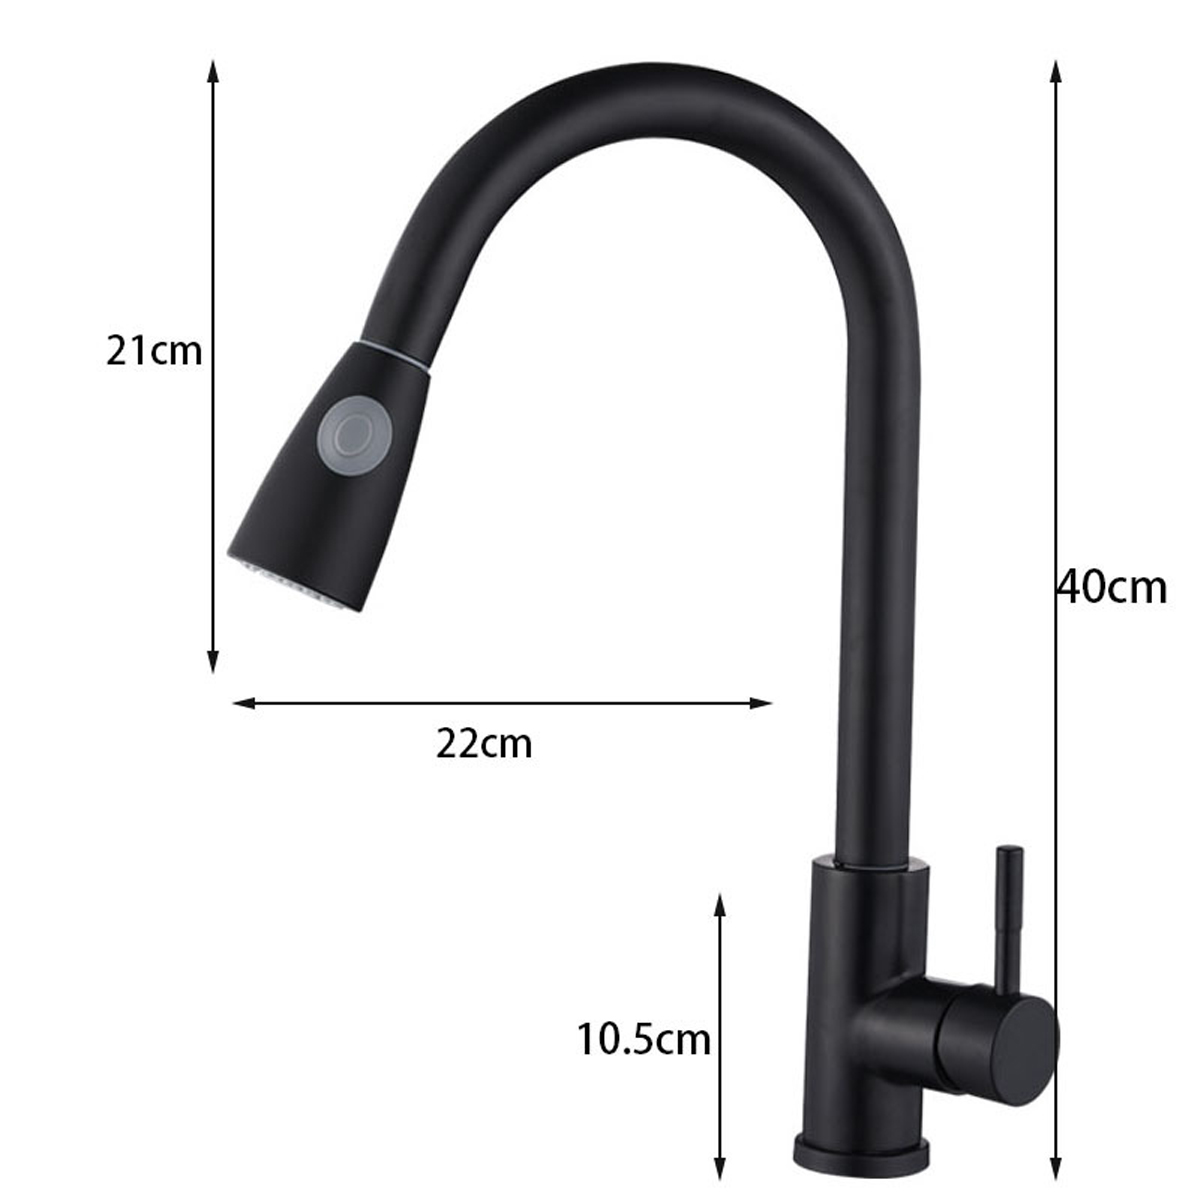 Stoneway Kitchen Sink Faucet with Pull Down Sprayer Black, High Arc Single Handle with Hose, Commercial Modern rv Solid Brass, Matte Black - image 3 of 7